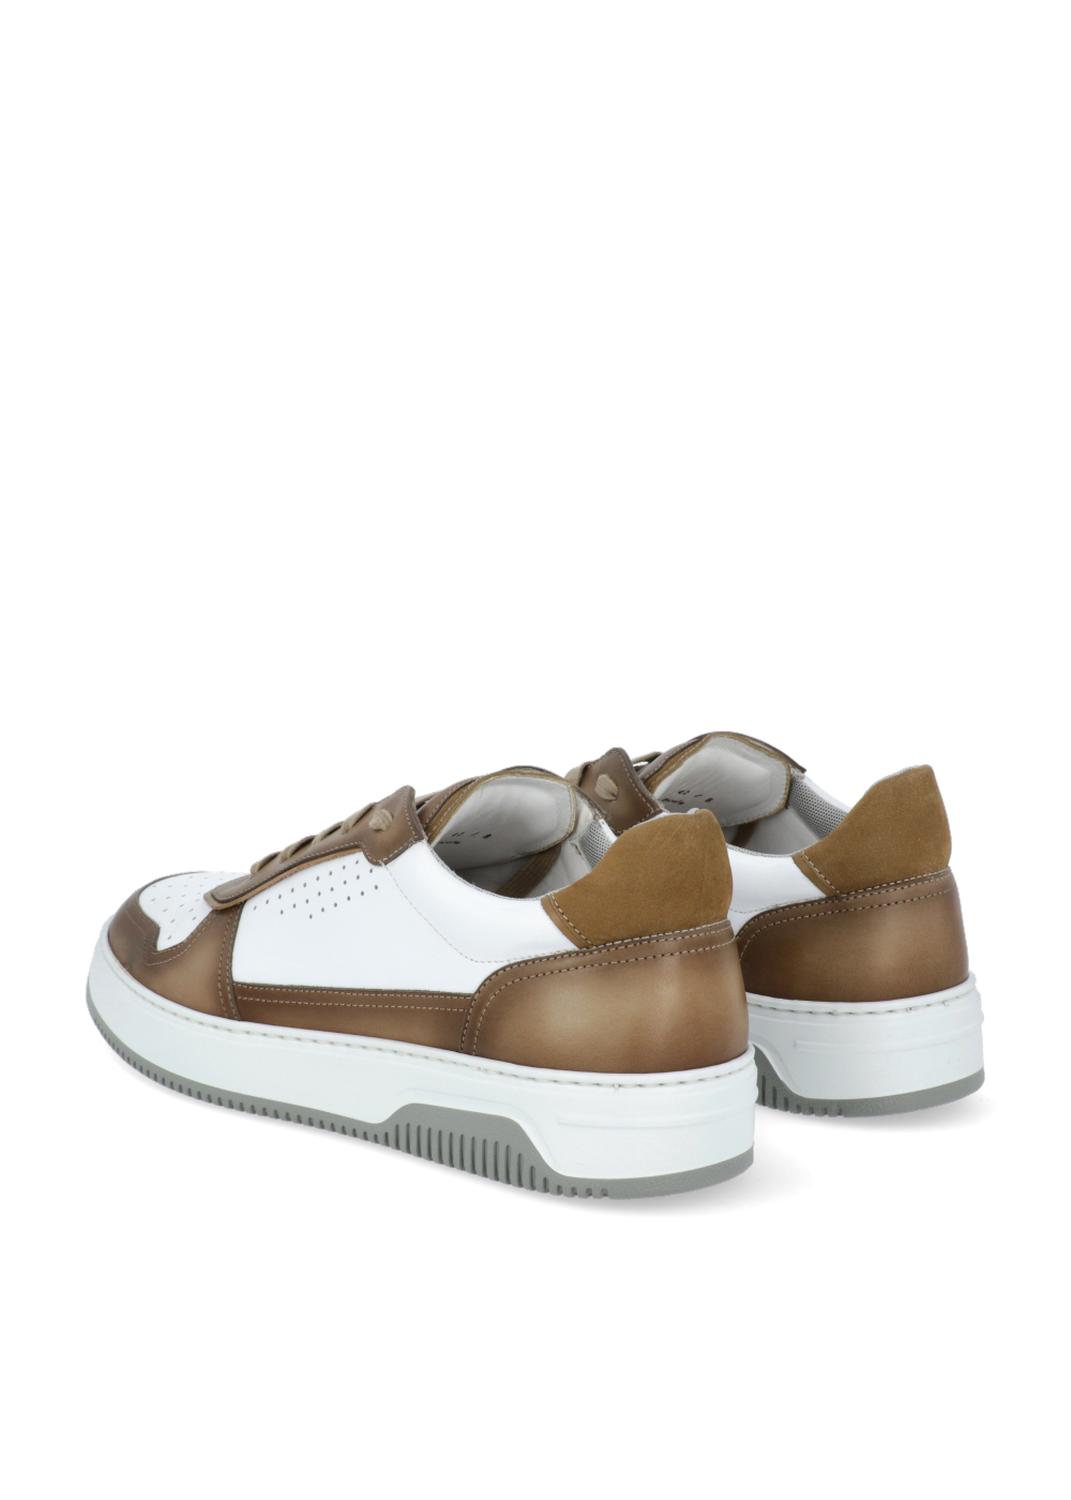 Magnanni Sneakers MGN-25547